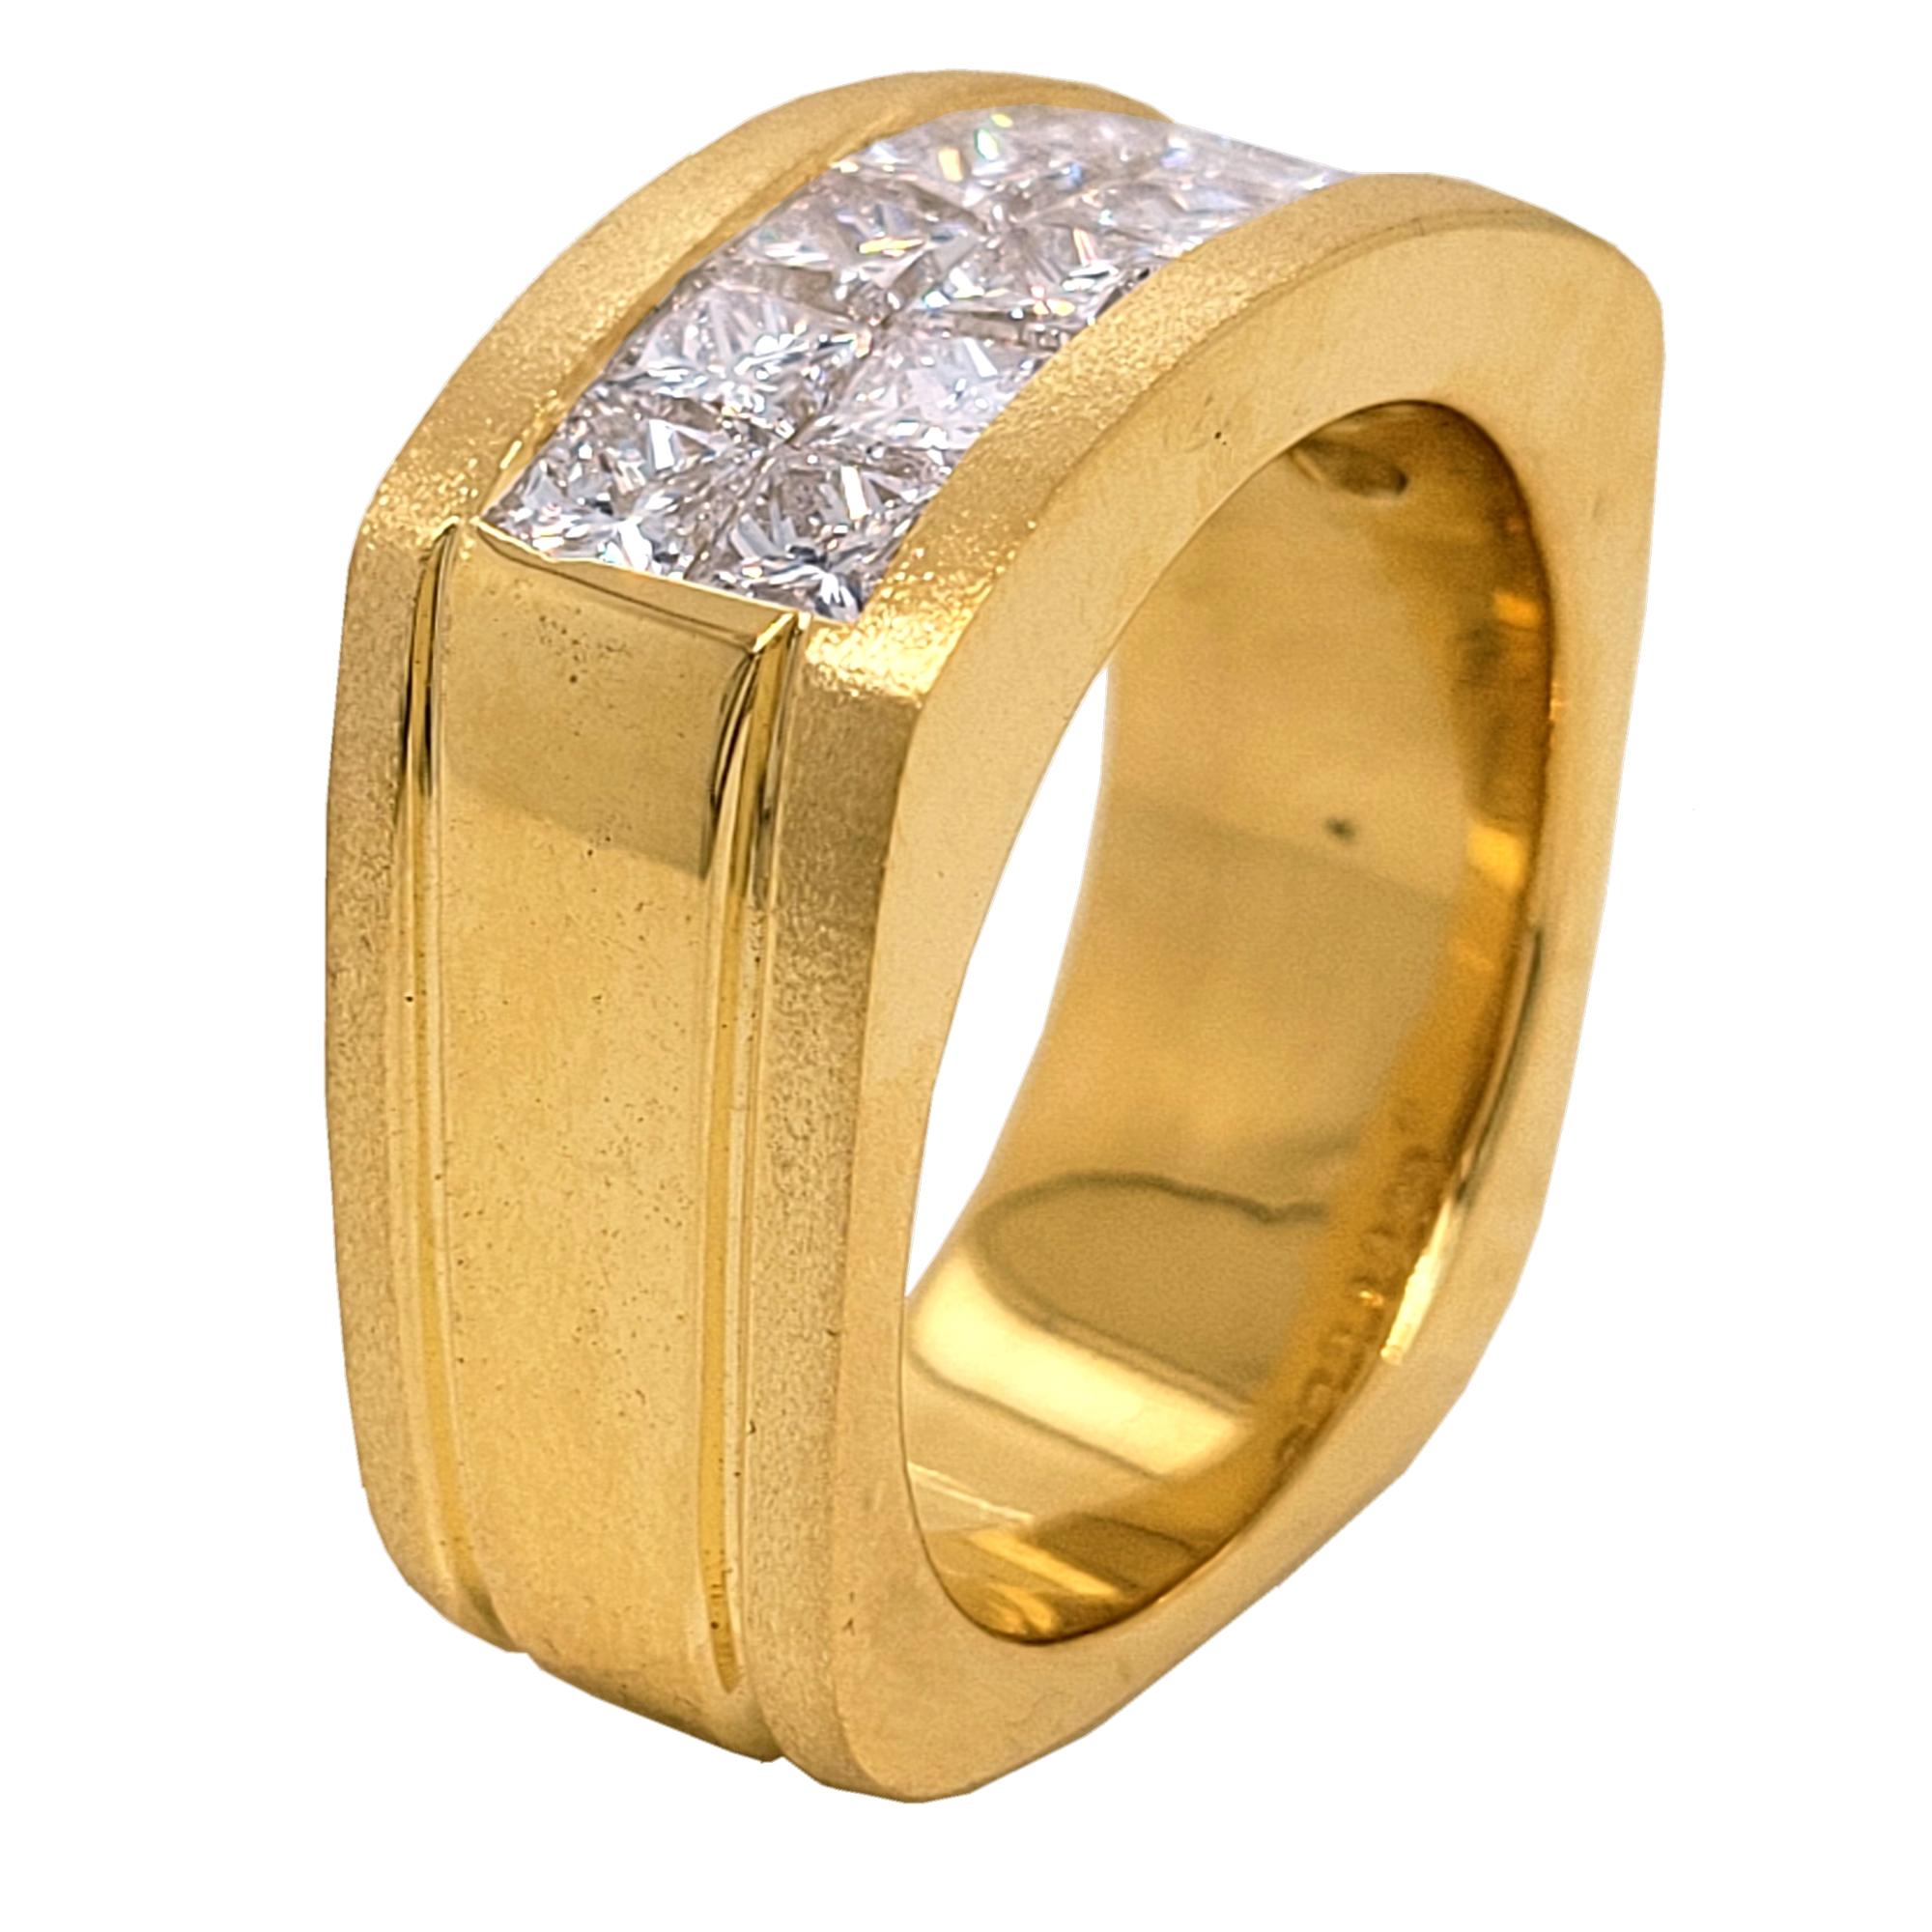 3.46 Carat Princess Cut Diamond 18 Karat Gents Ring In New Condition For Sale In Los Angeles, CA